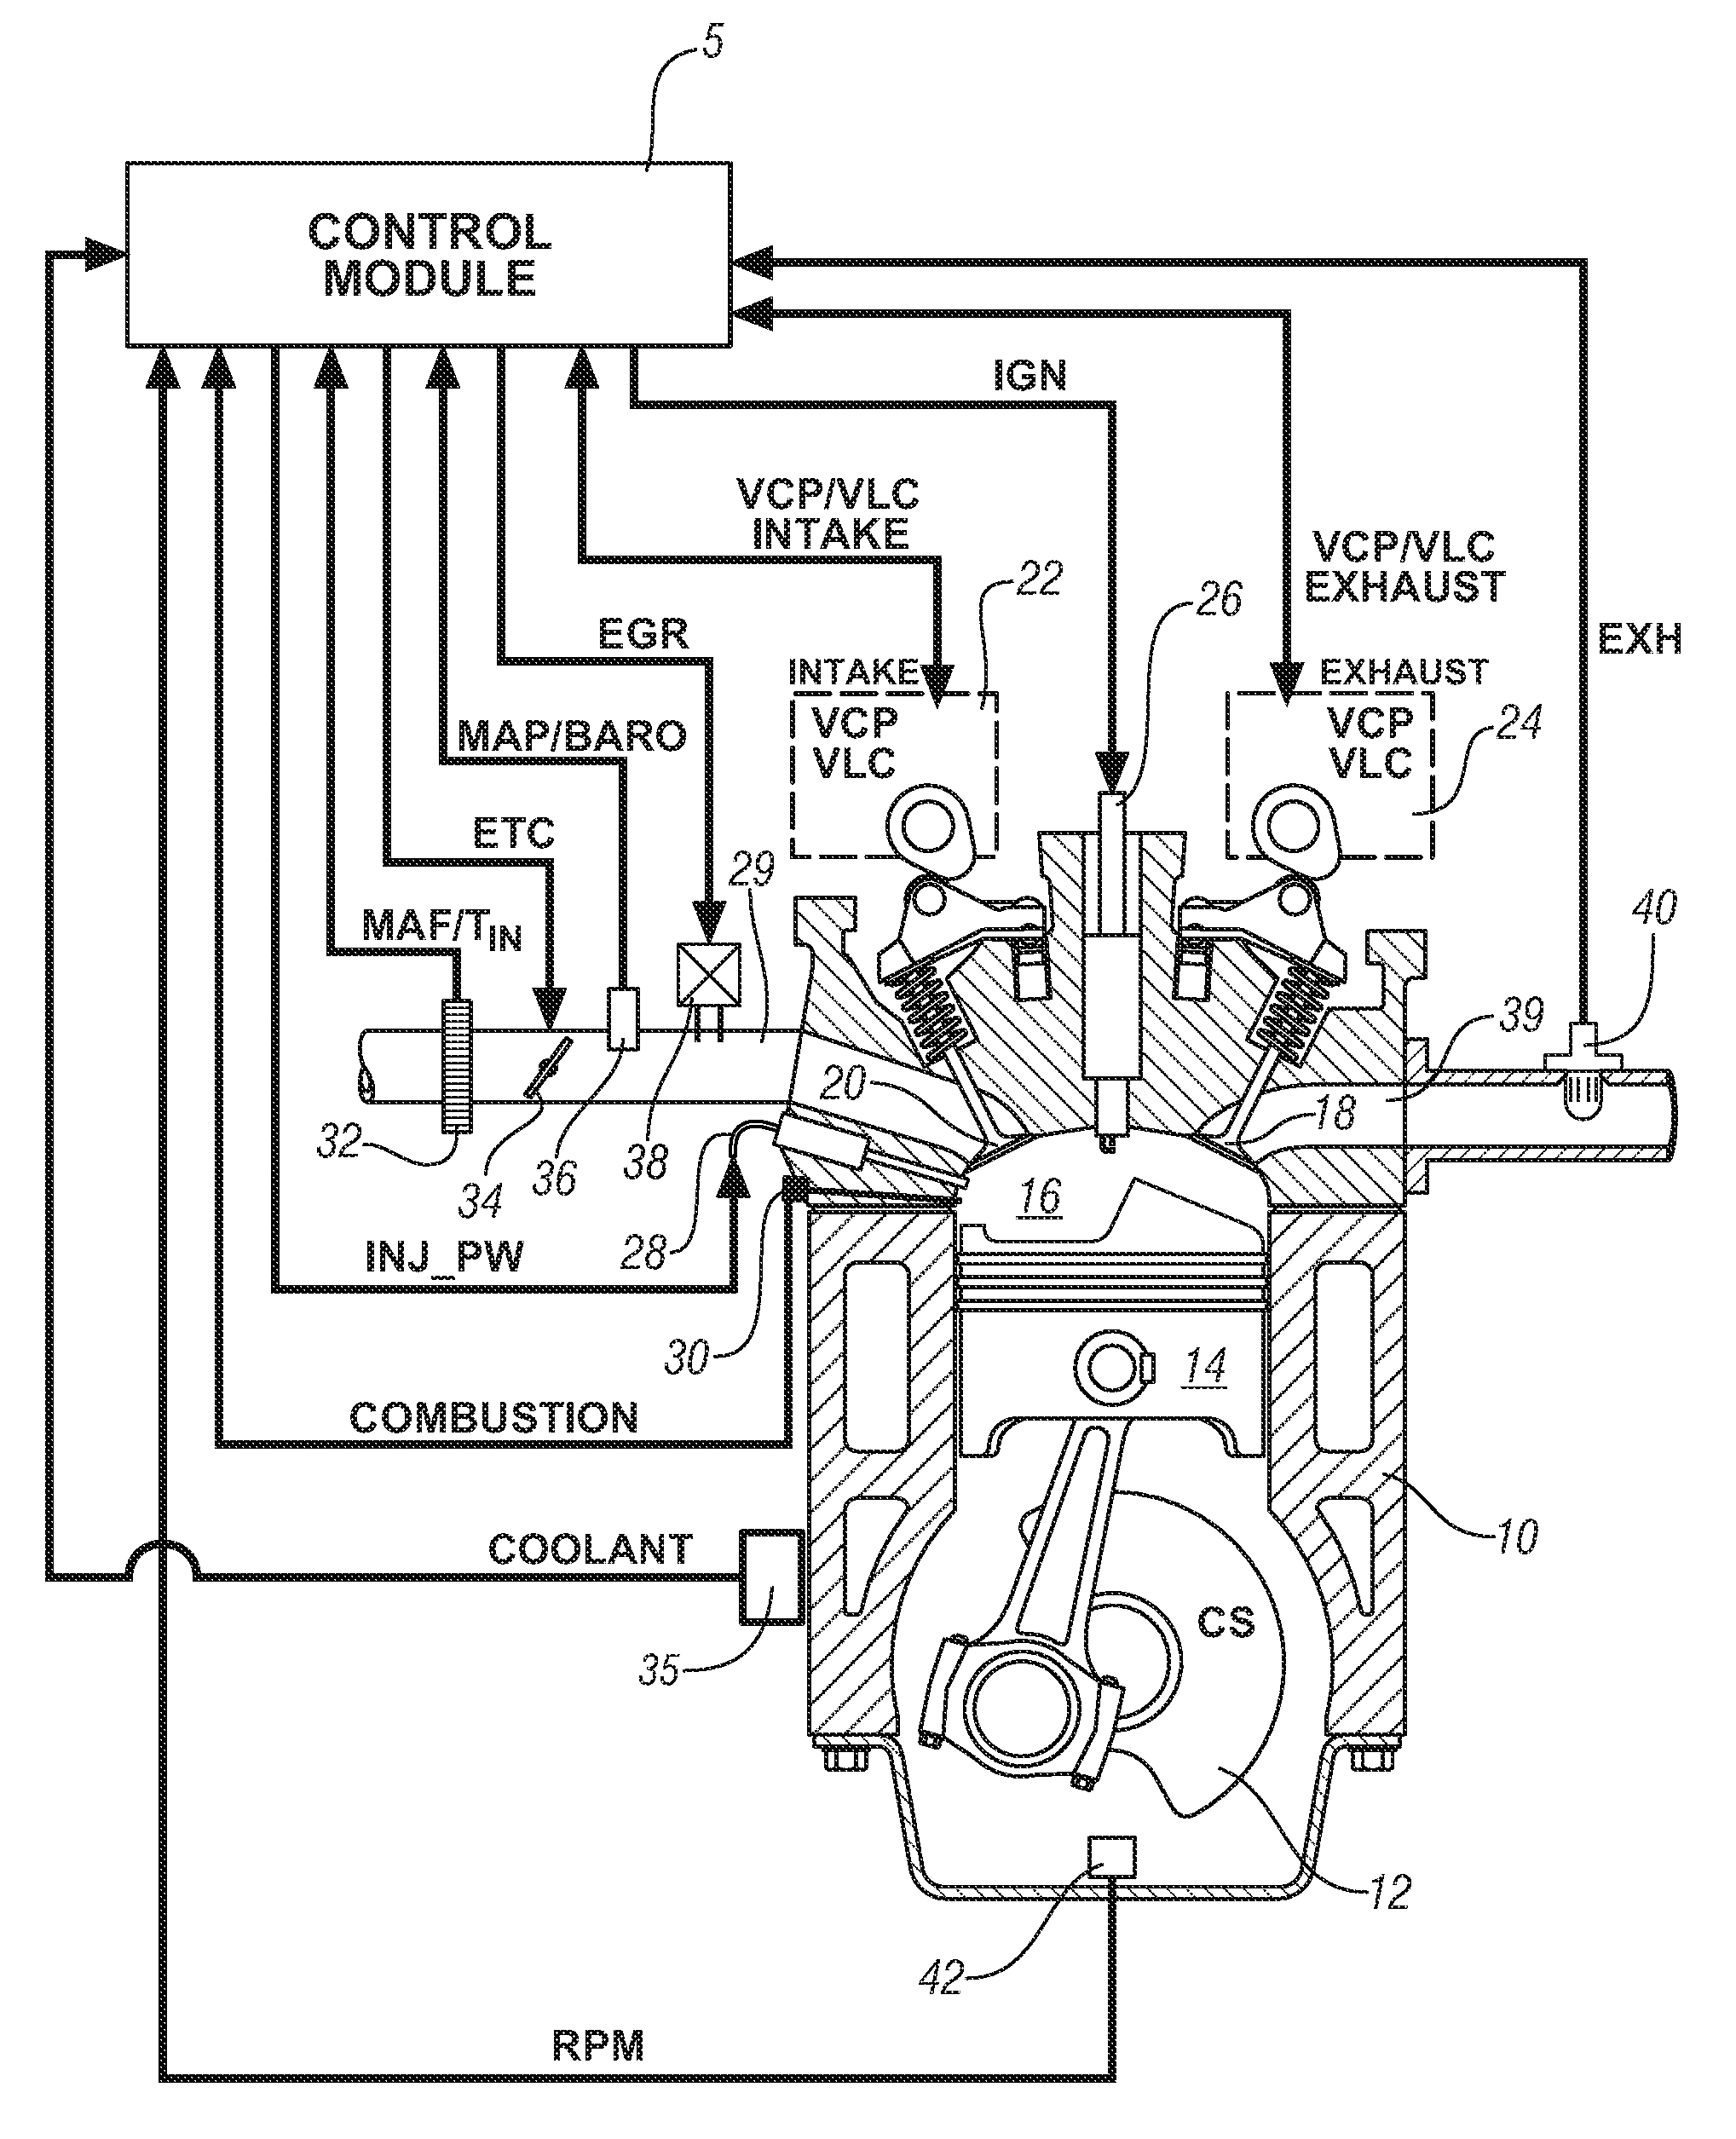 Method and apparatus to control a transition between HCCI and SI combustion in a direct-injection gasoline engine